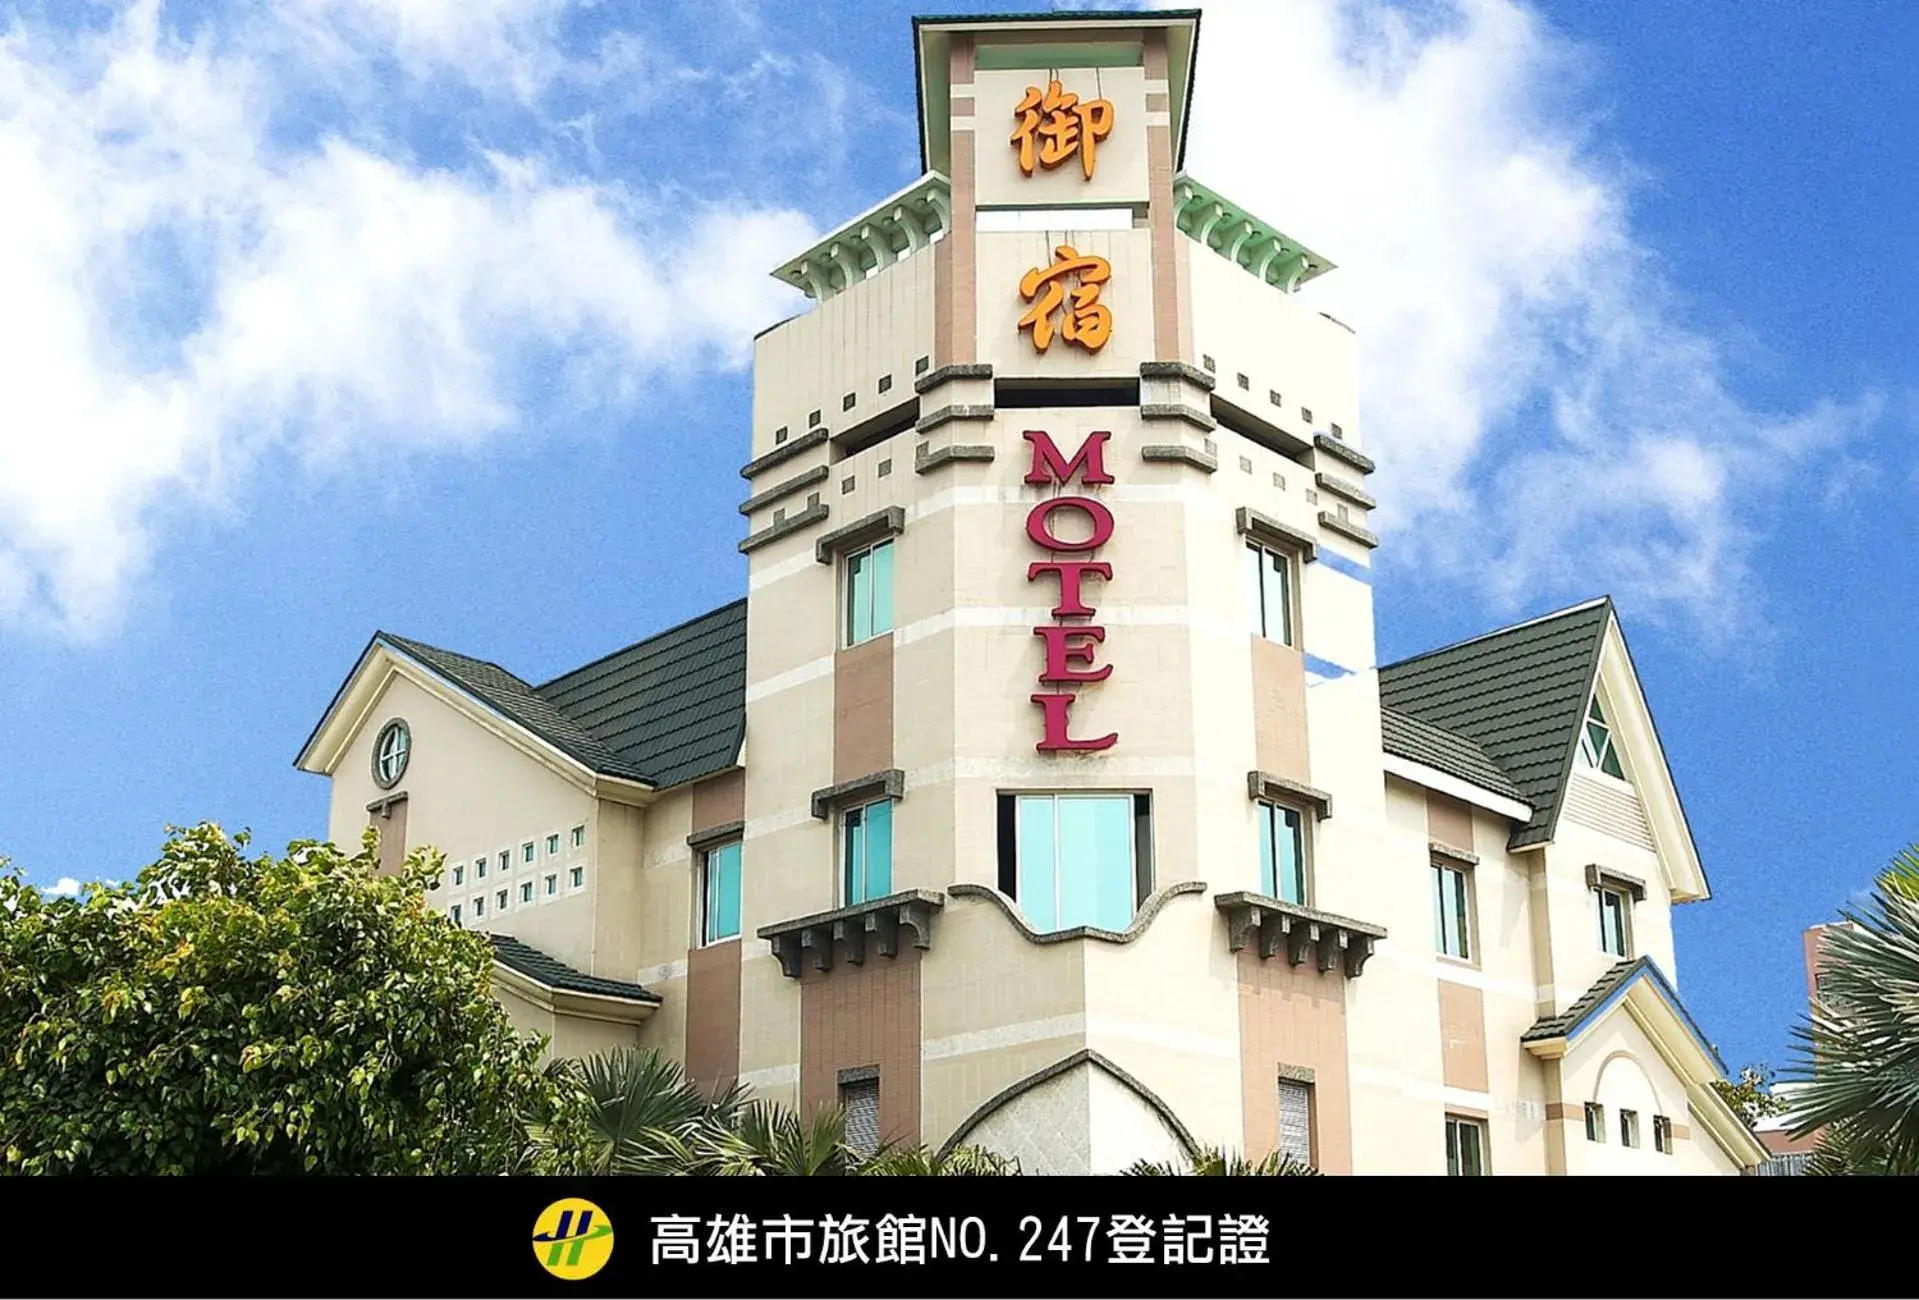 Property Building in Royal Group Motel Chien Kuo Branch